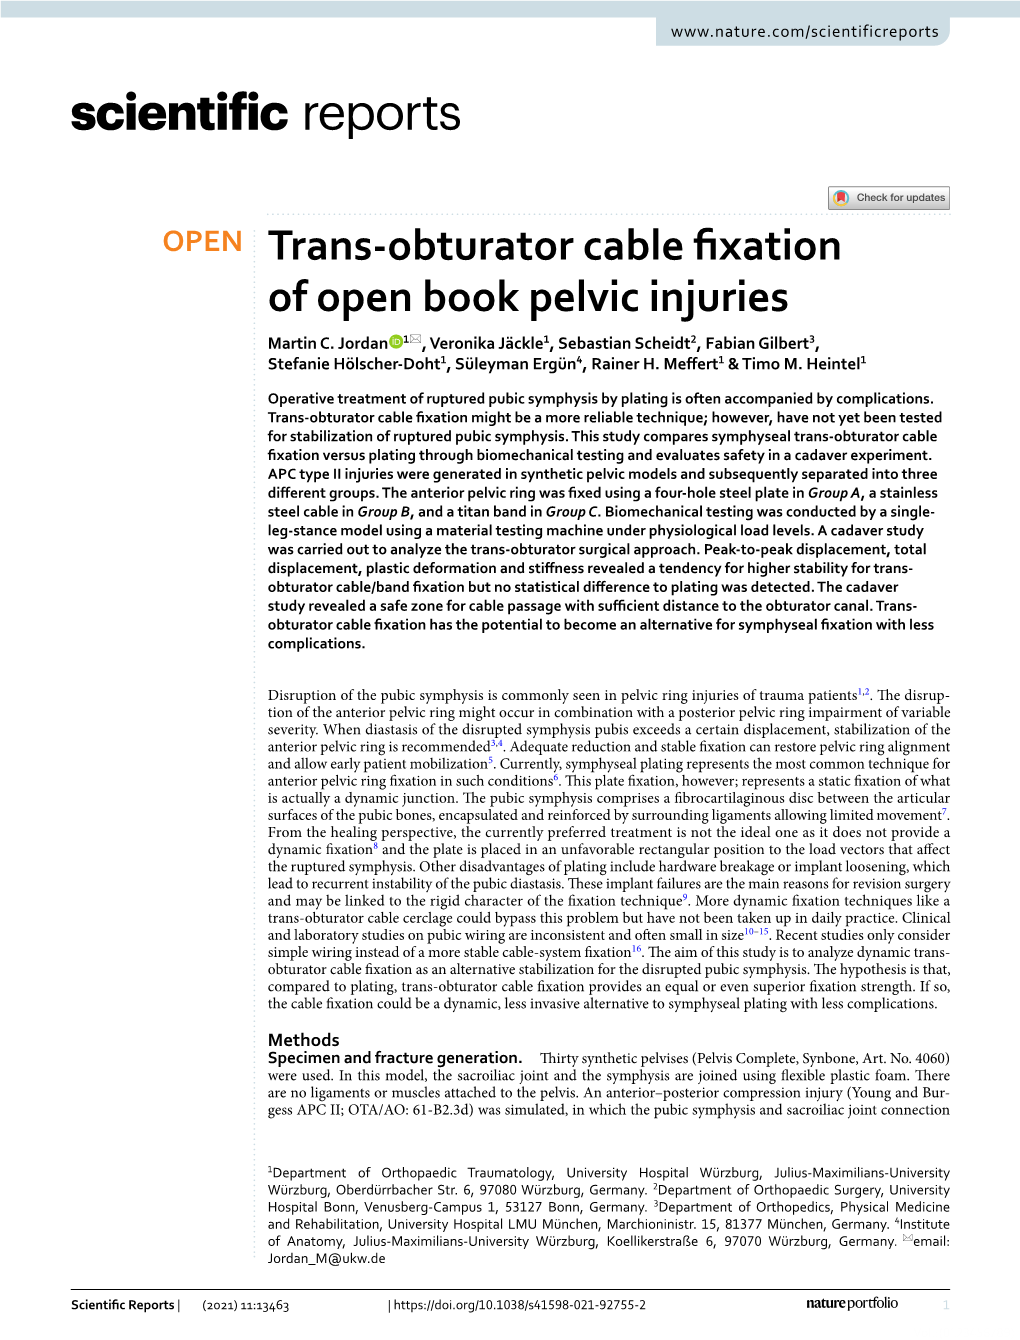 Trans-Obturator Cable Fixation of Open Book Pelvic Injuries